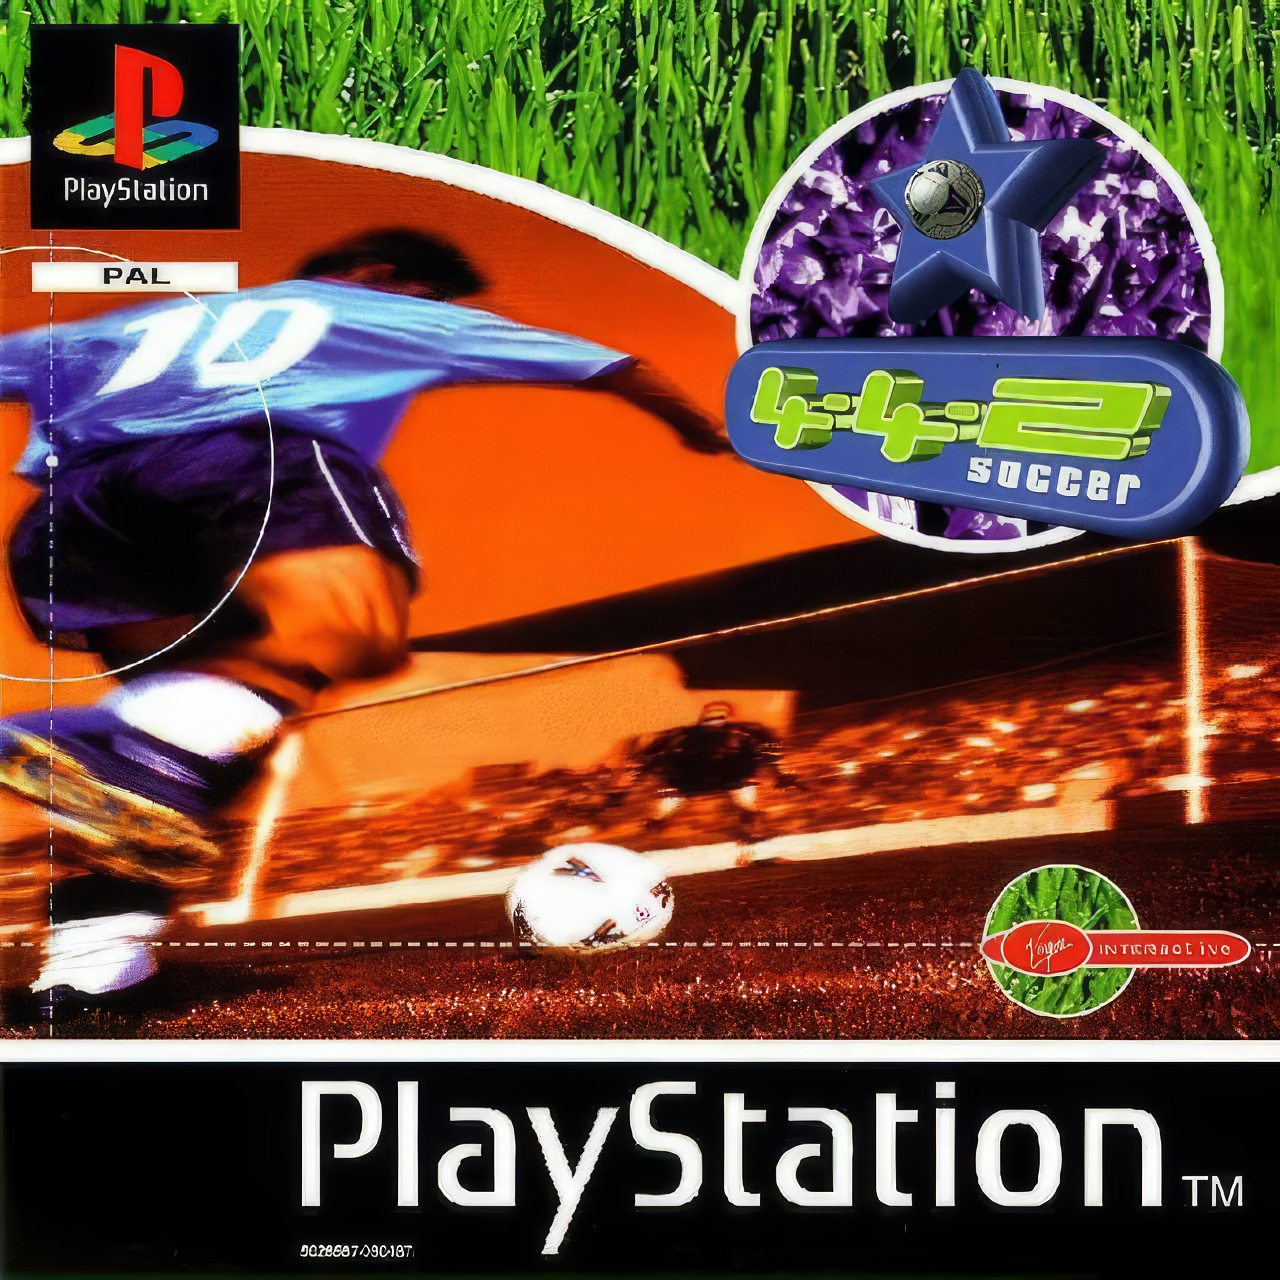 Review: 4-4-2 Soccer for Playstation 1